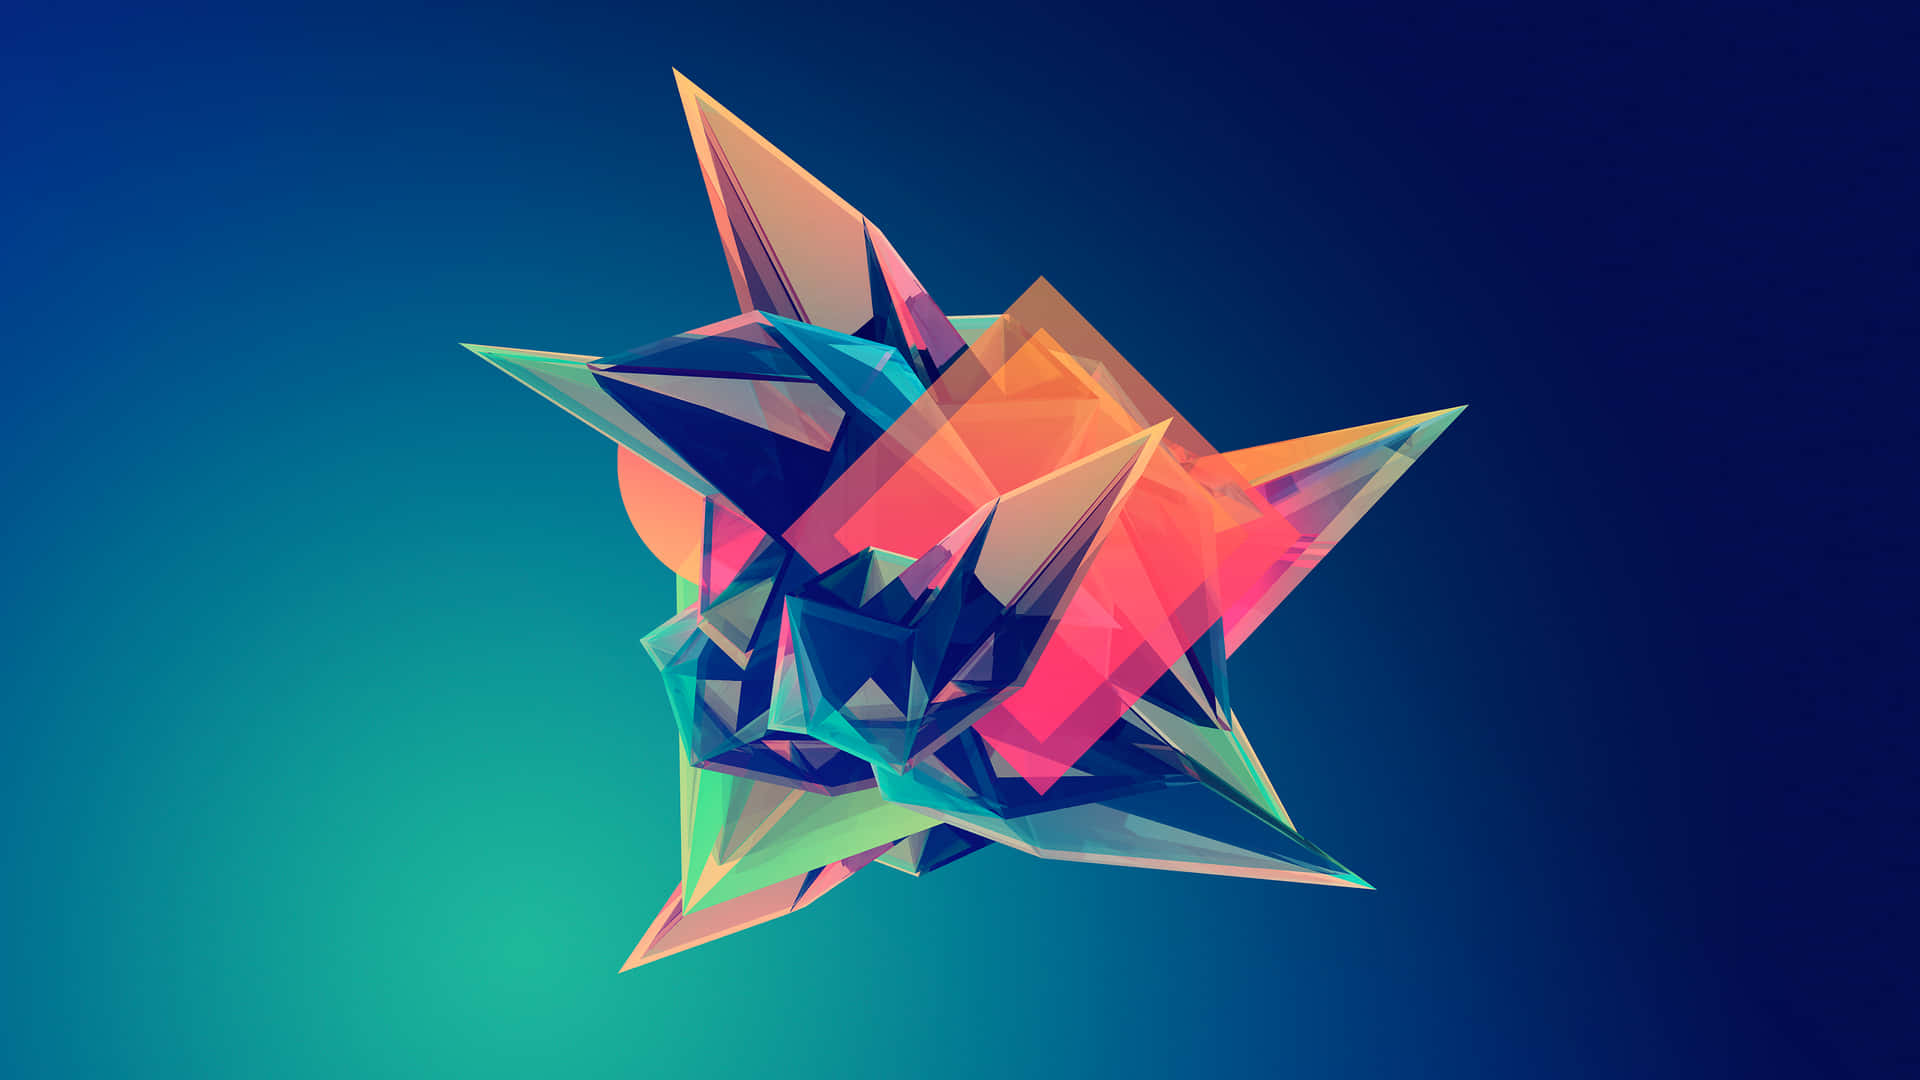 A Colorful Abstract Design With Colorful Triangles Wallpaper